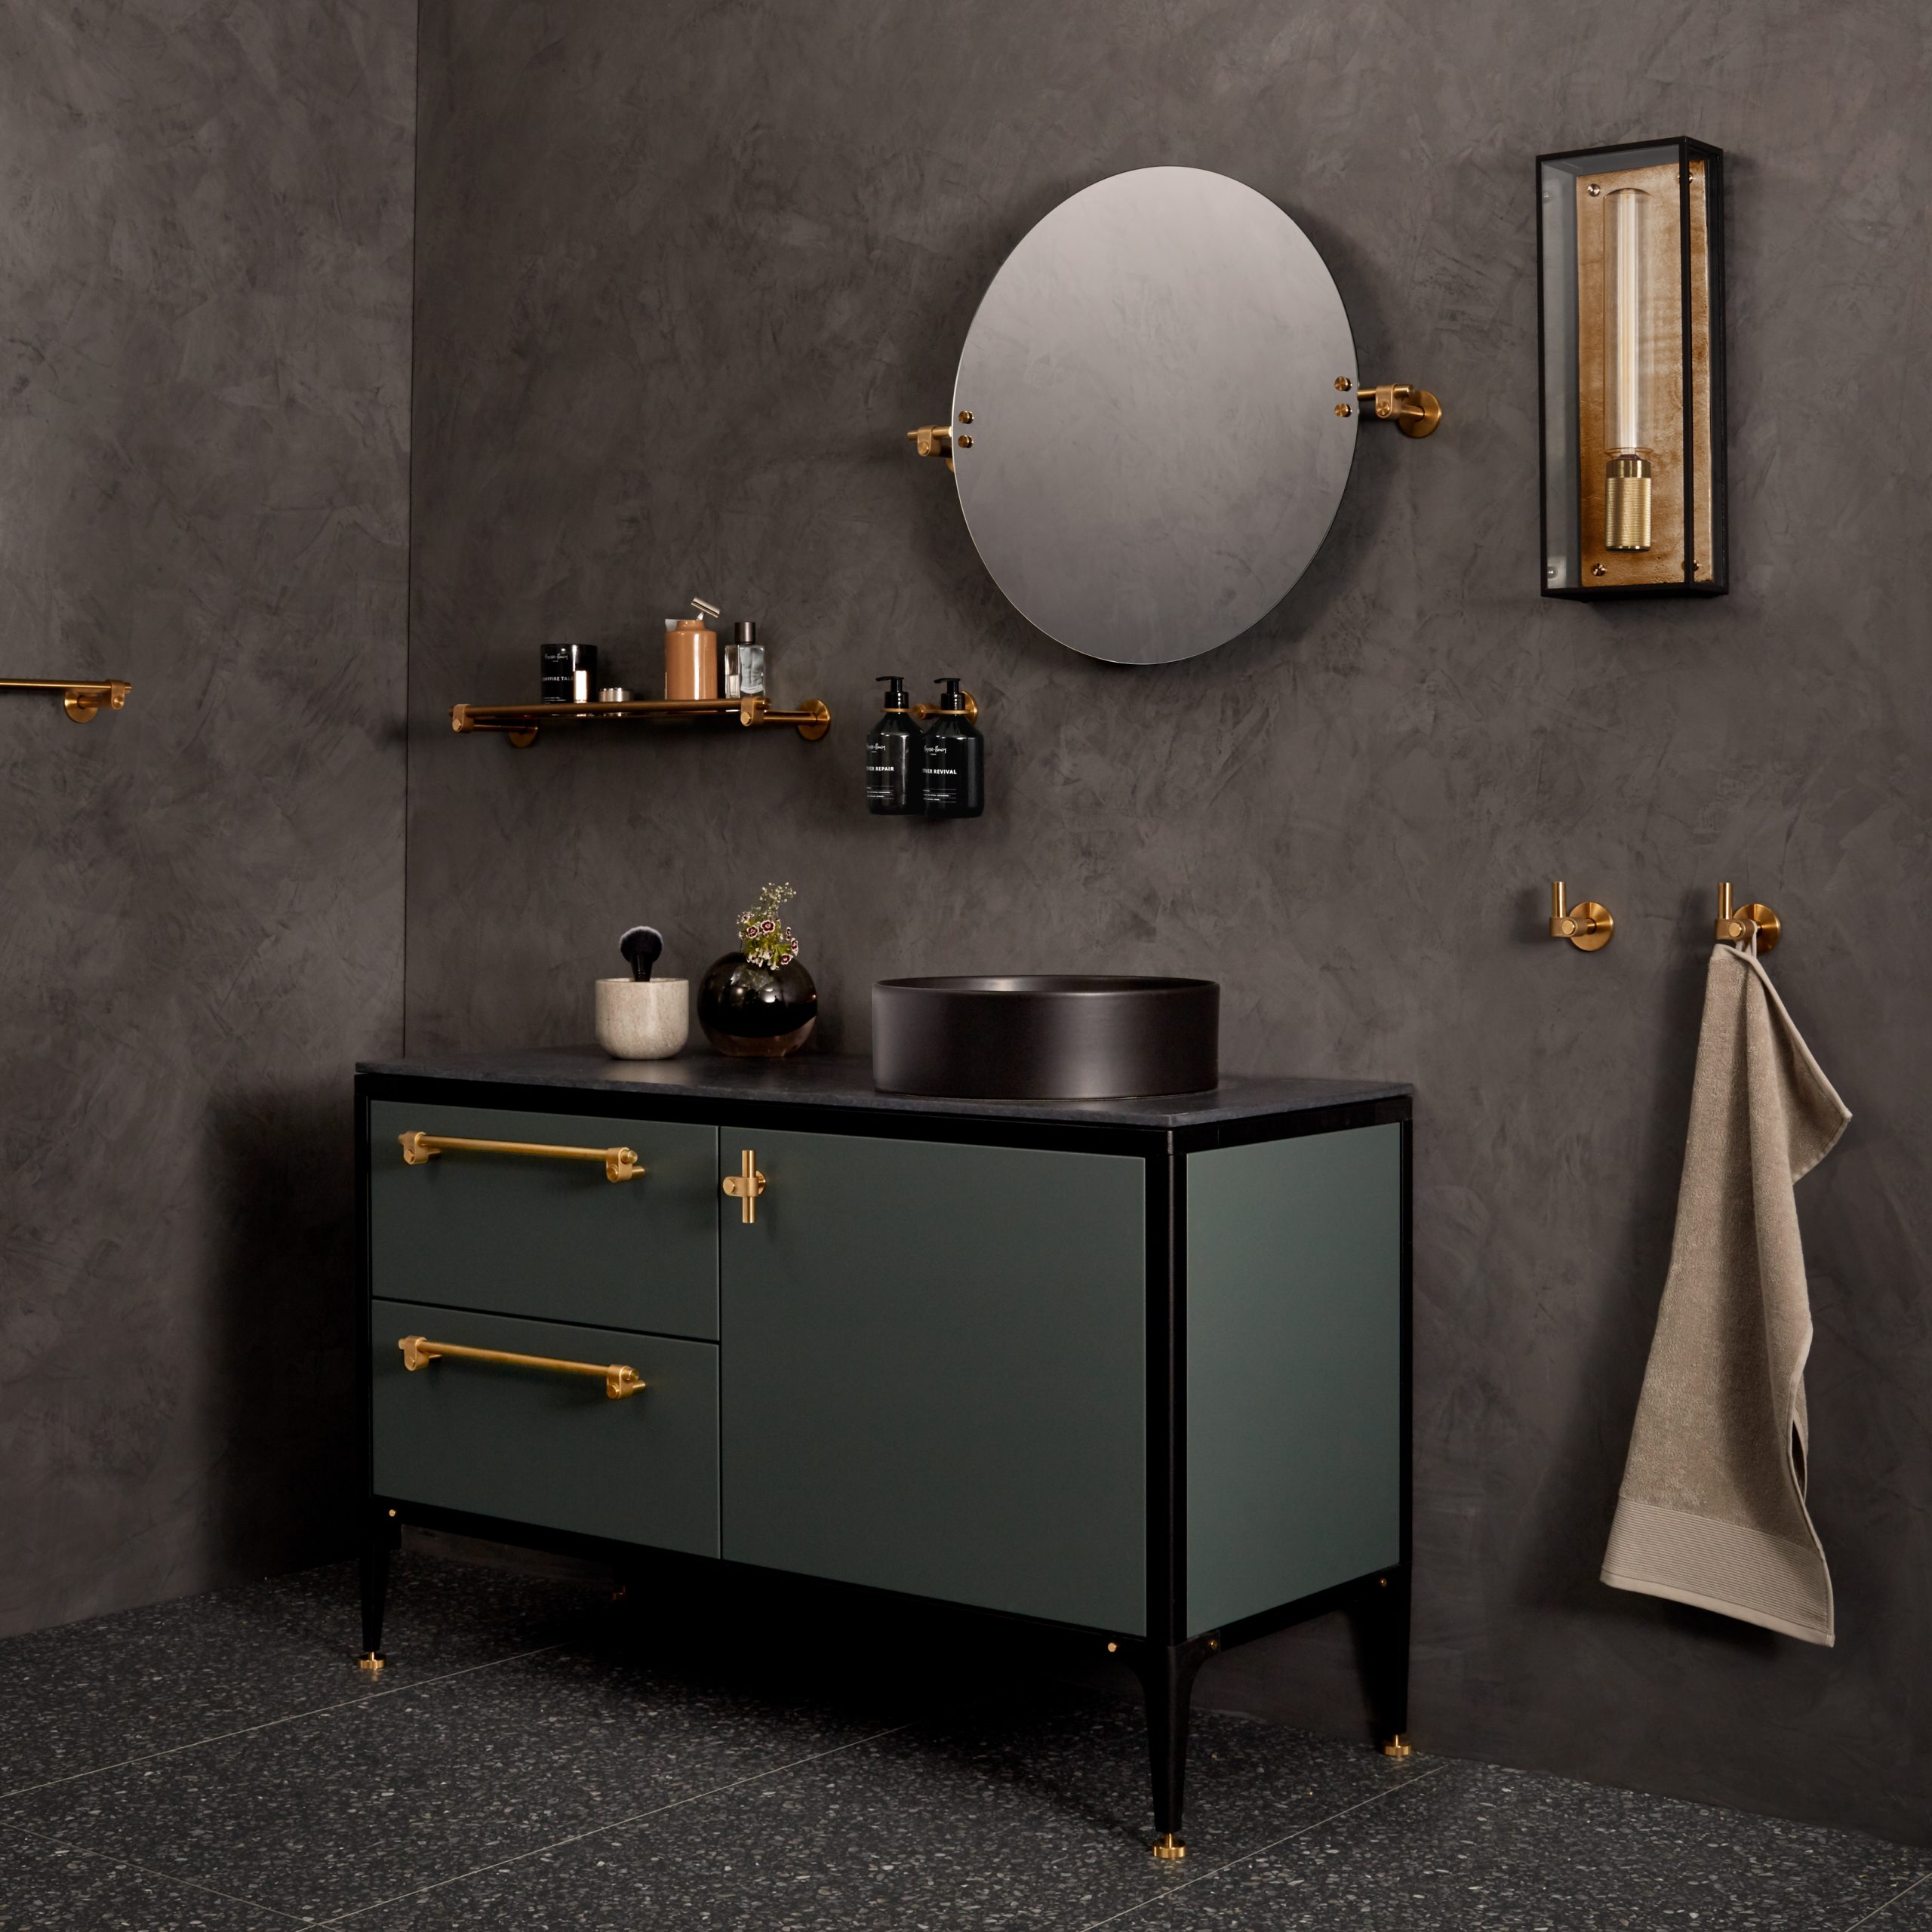 Enhance Your Bathroom Design with Buster + Punch’s Stylish Cast Range